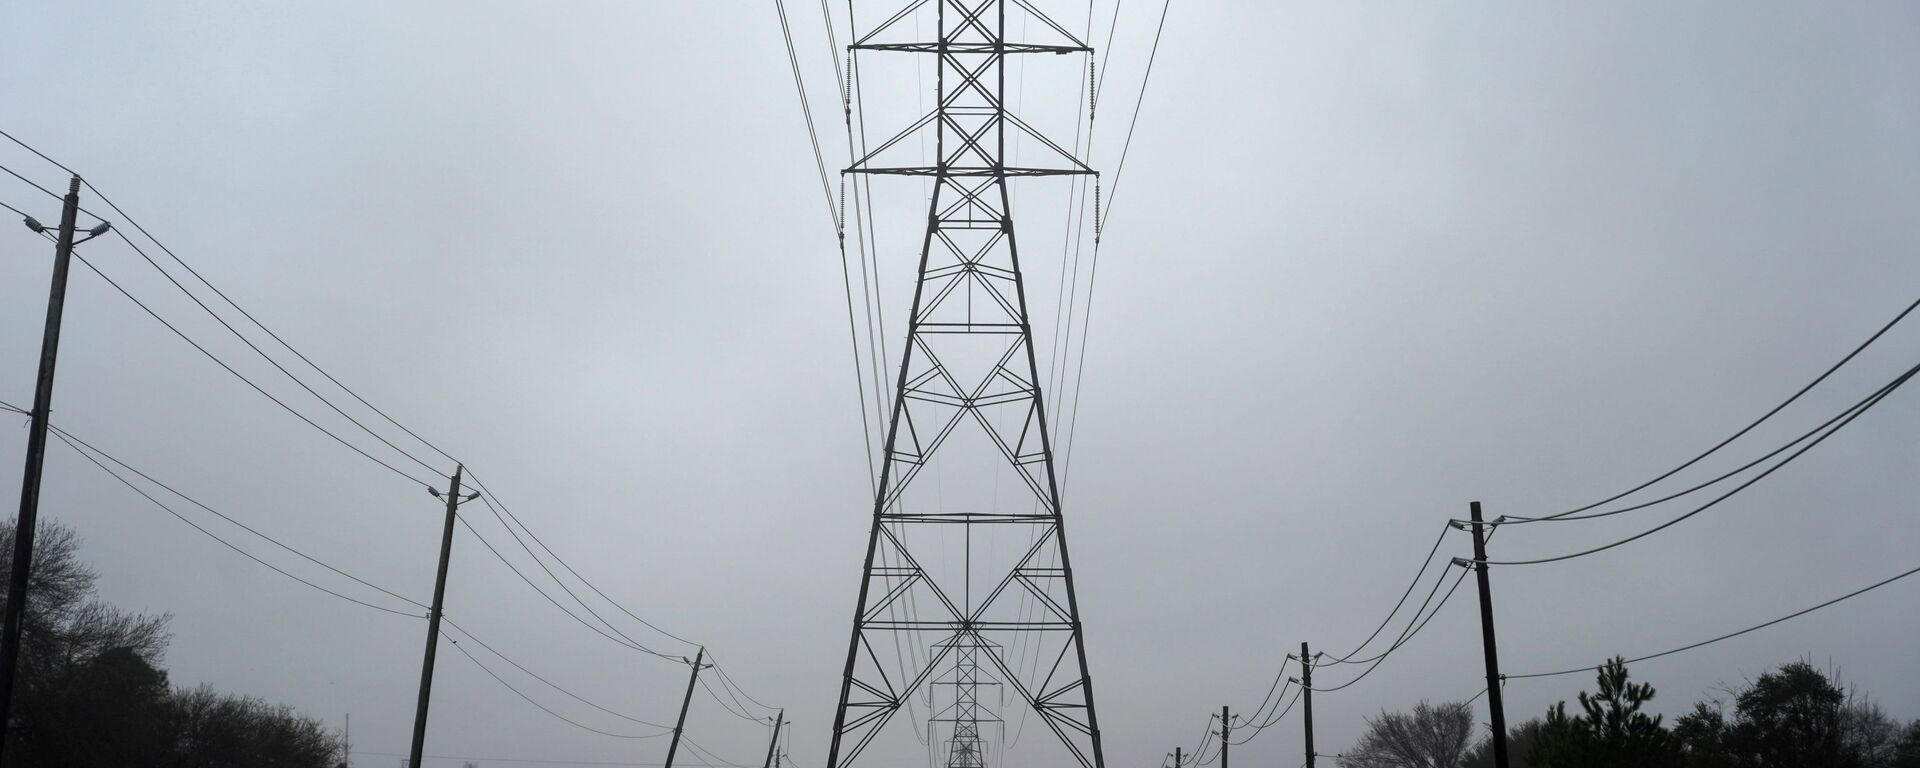 Power lines are seen after winter weather caused electricity blackouts in Houston, Texas, U.S. February 17, 2021 - Sputnik International, 1920, 14.06.2021